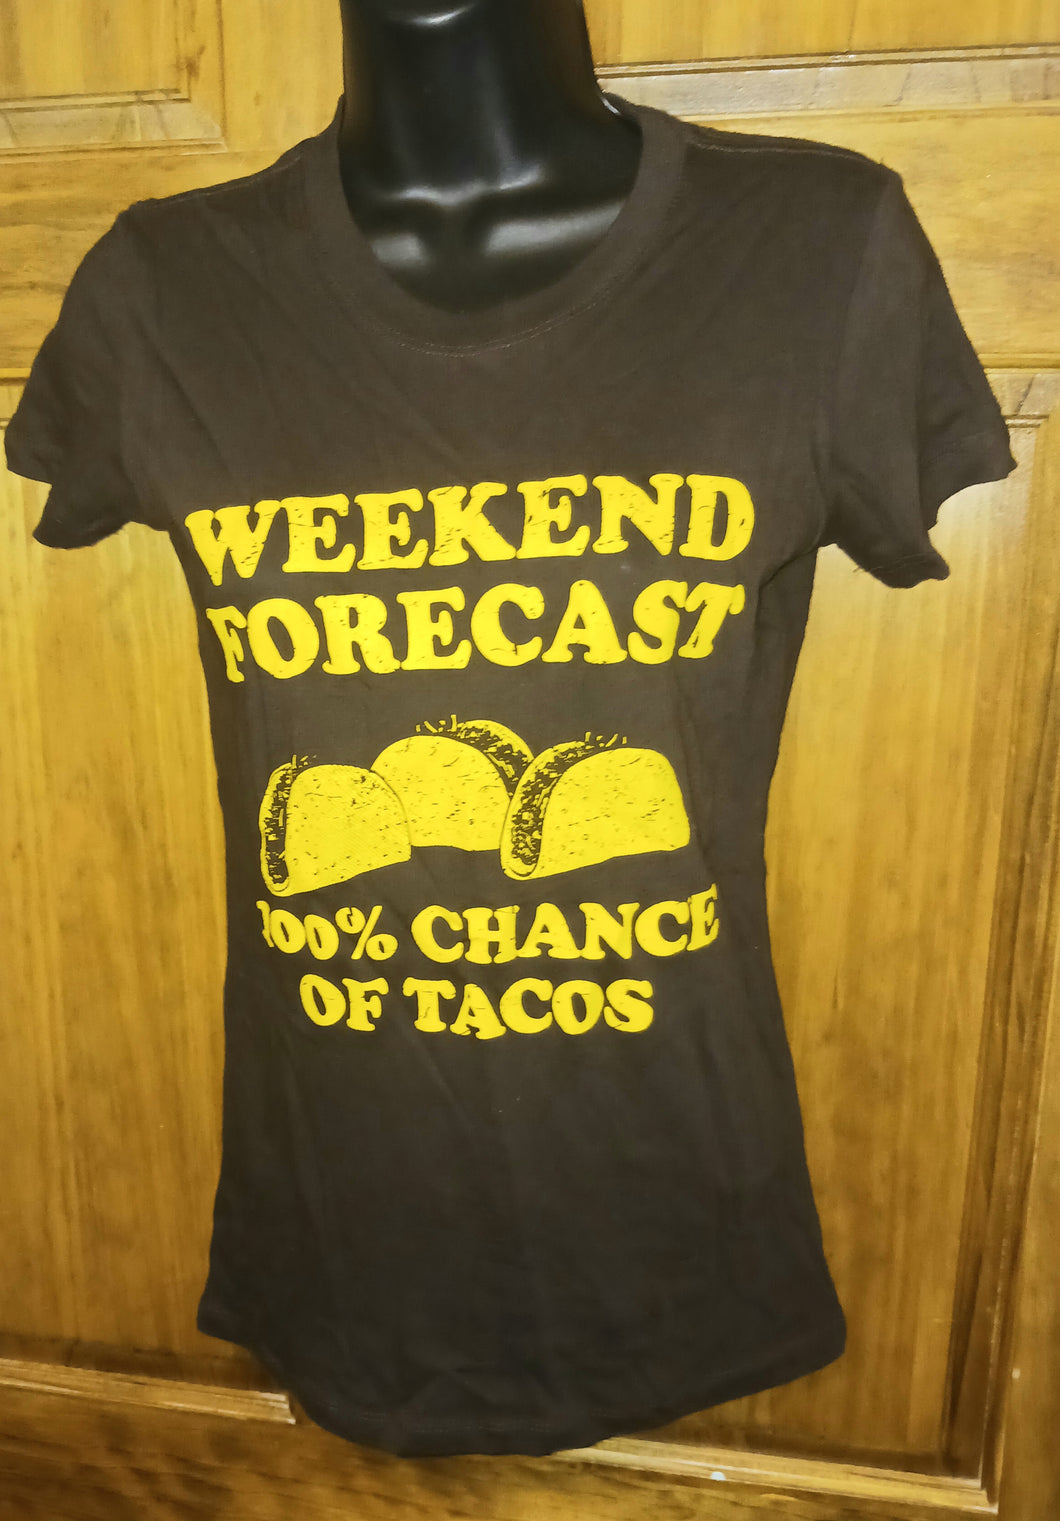 Weekend Forecast 100% Chance of Tacos Women's Humor T-Shirt Brown Size Small Next Level Apparel